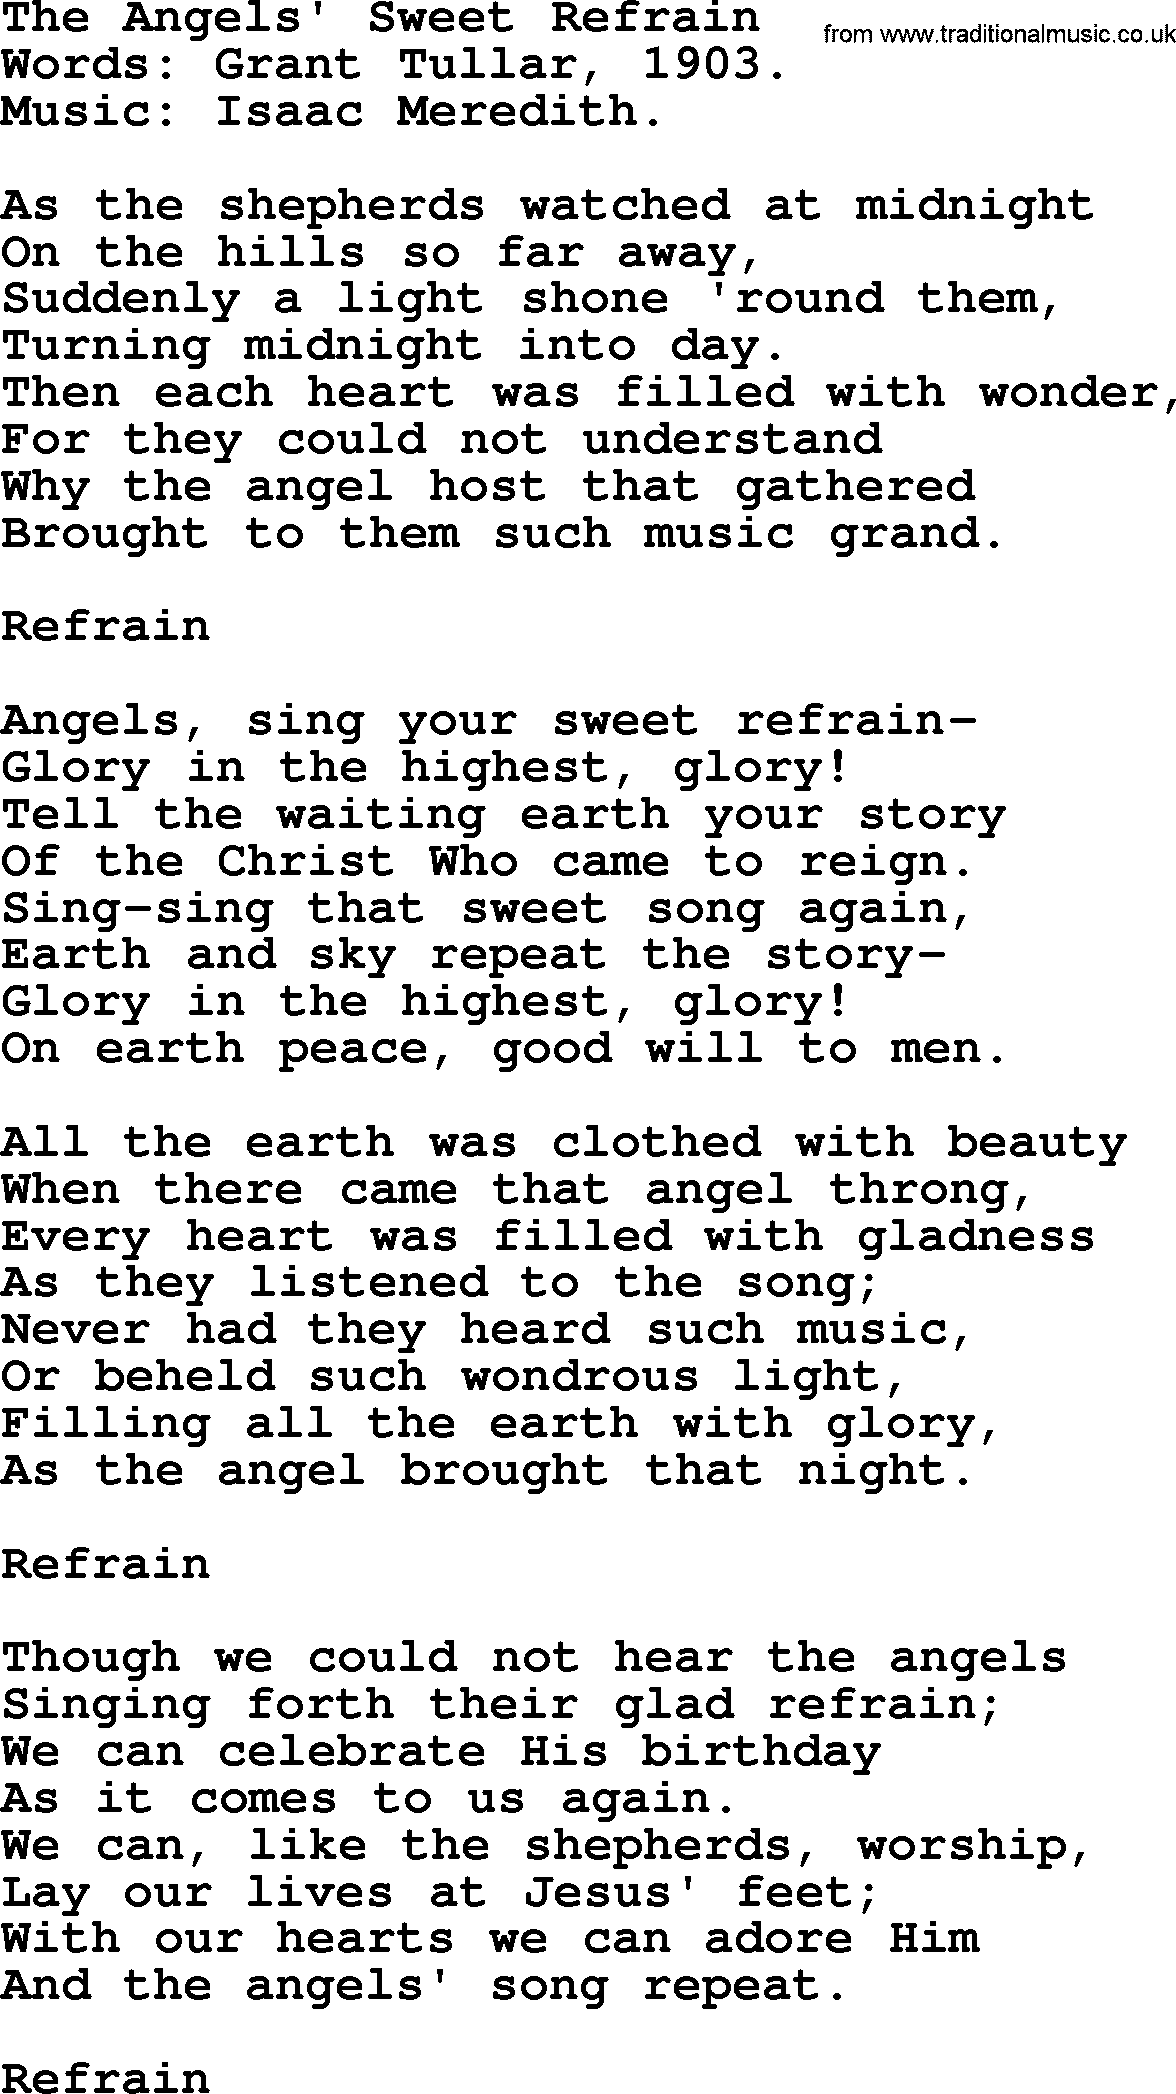 Hymns about Angels, Hymn: The Angels' Sweet Refrain.txt lyrics with PDF